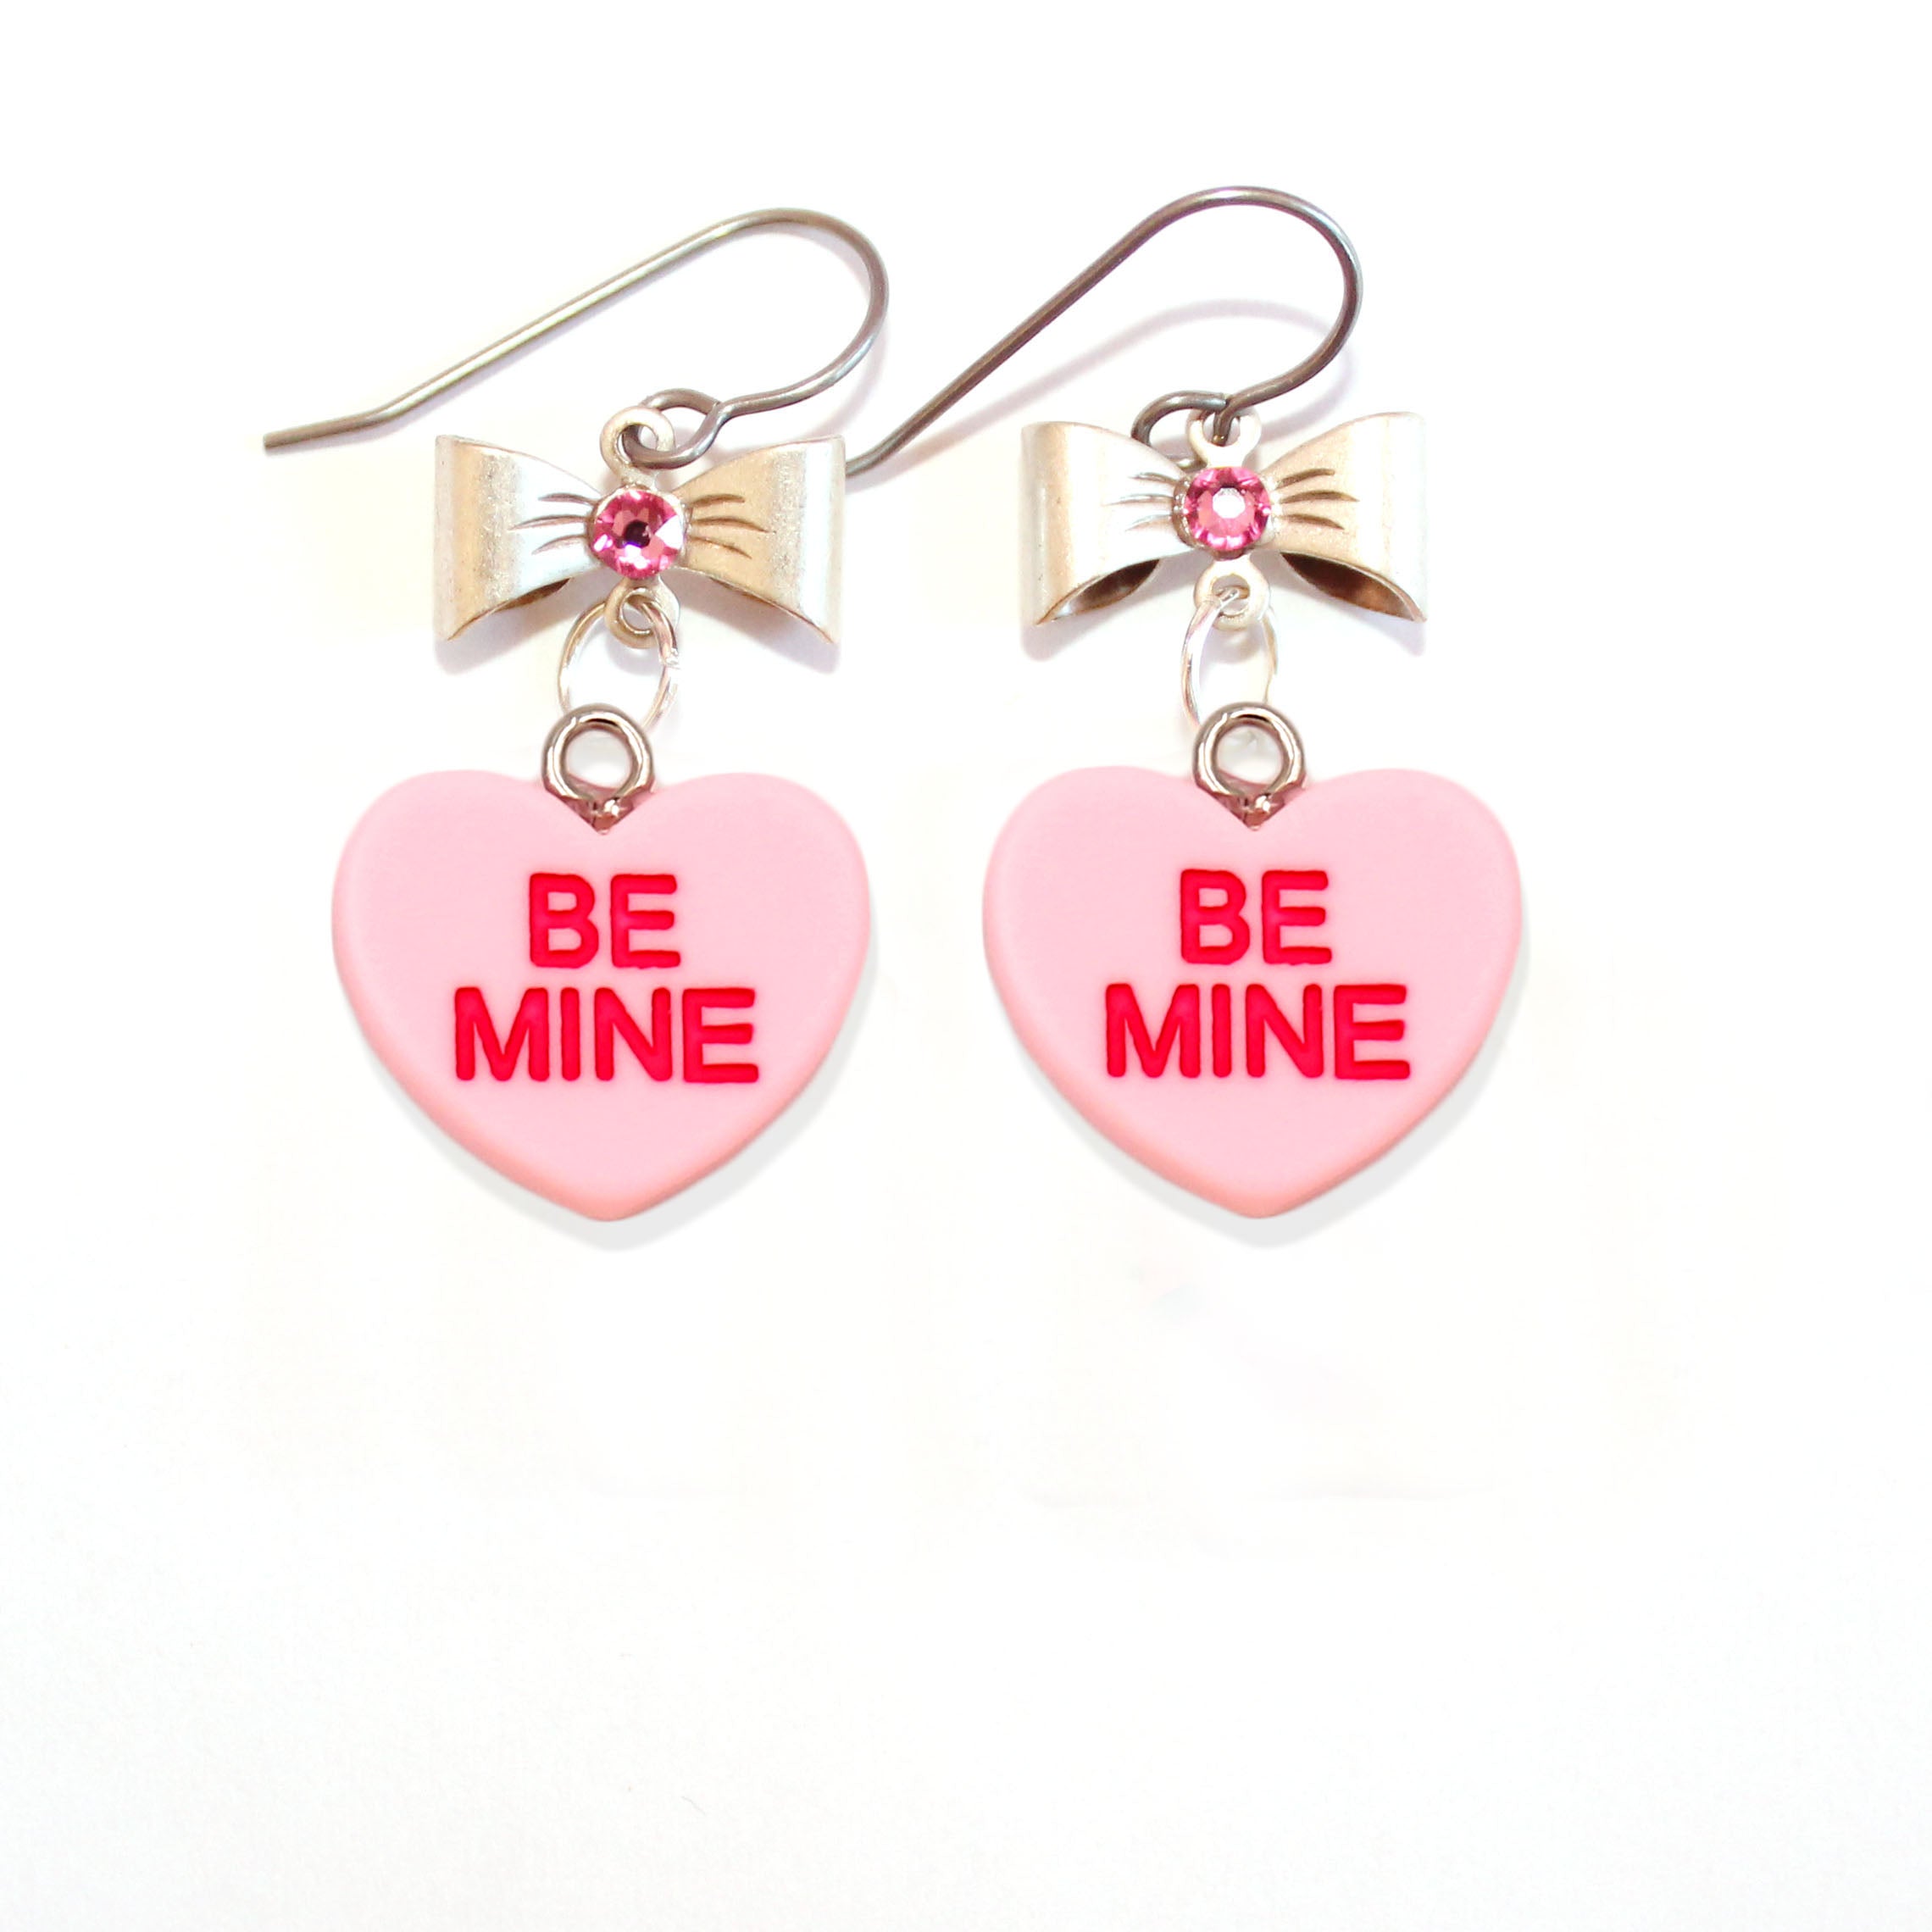 Bow and Pearl Macaron Heart Earrings - Valentines Day – Fatally